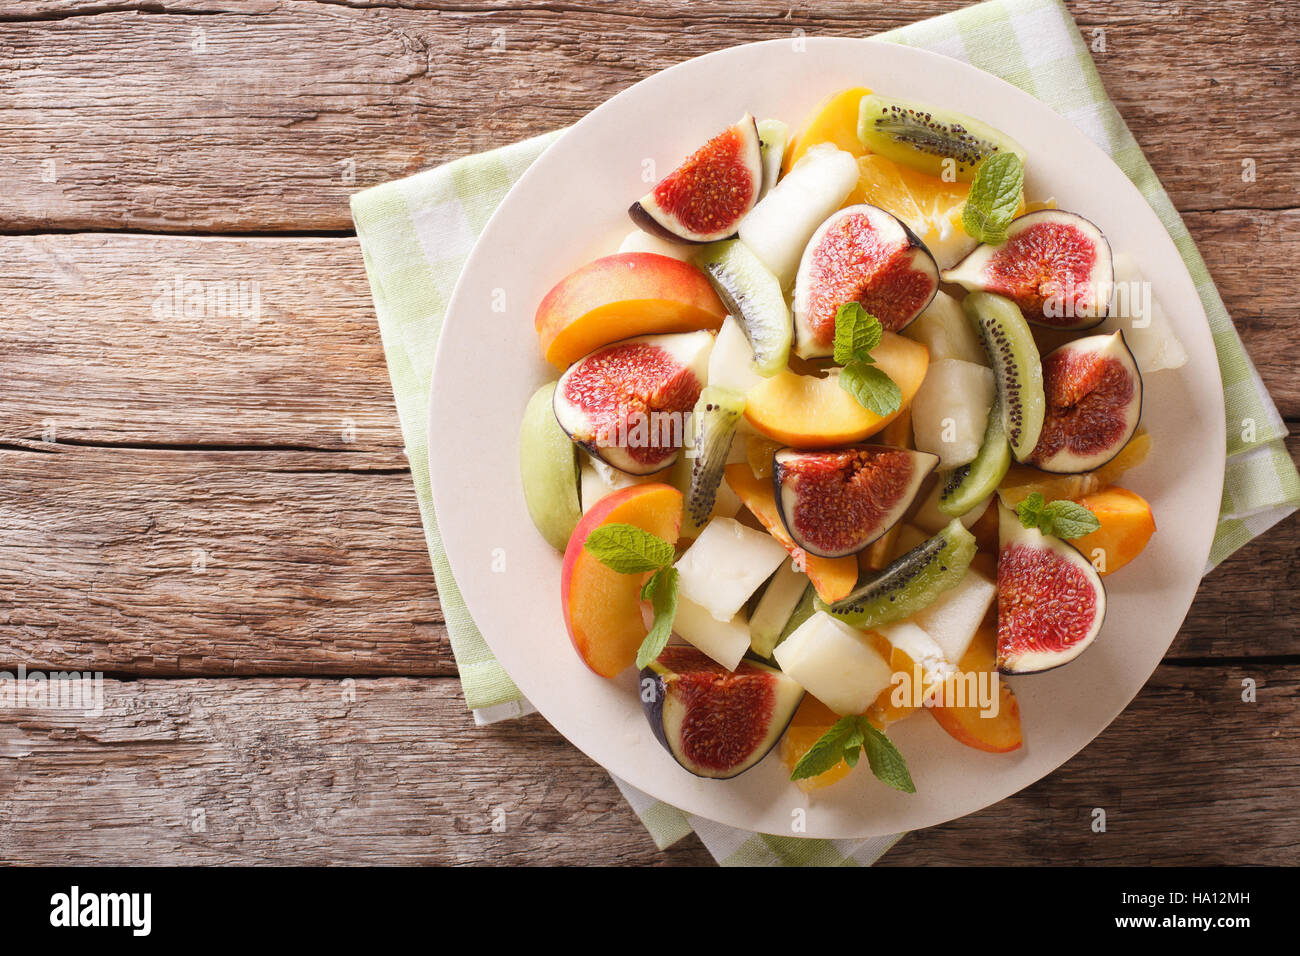 Healthy Fruit salad with fig, peach, melon, kiwi and orange close-up on the table. horizontal view from above Stock Photo